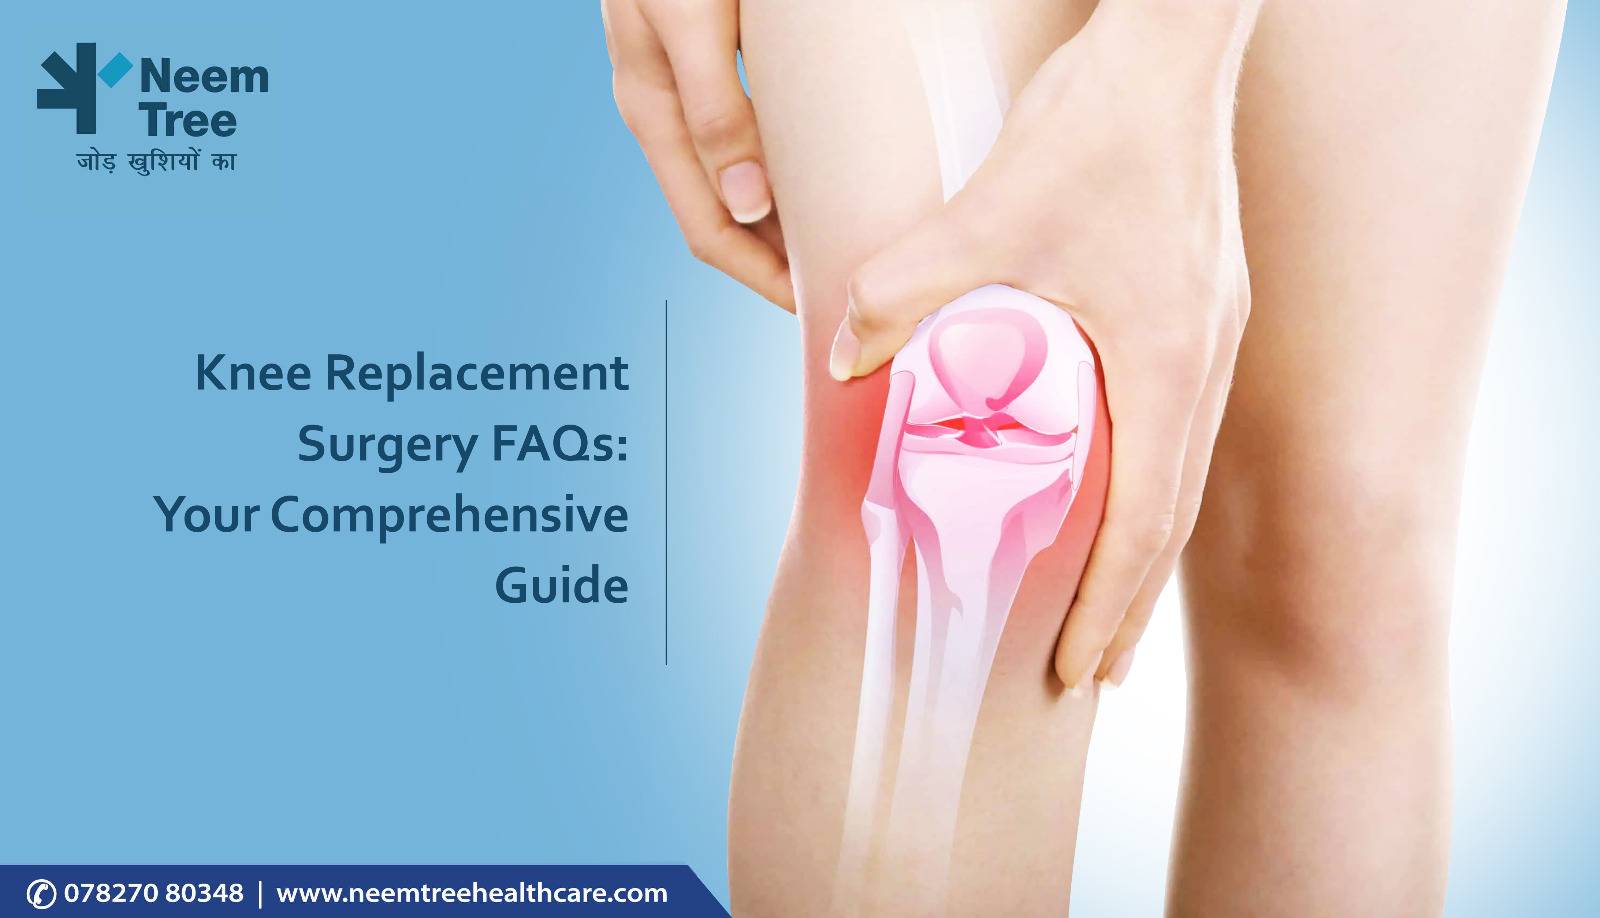 Knee Replacement Surgery FAQs- Your Comprehensive Guide